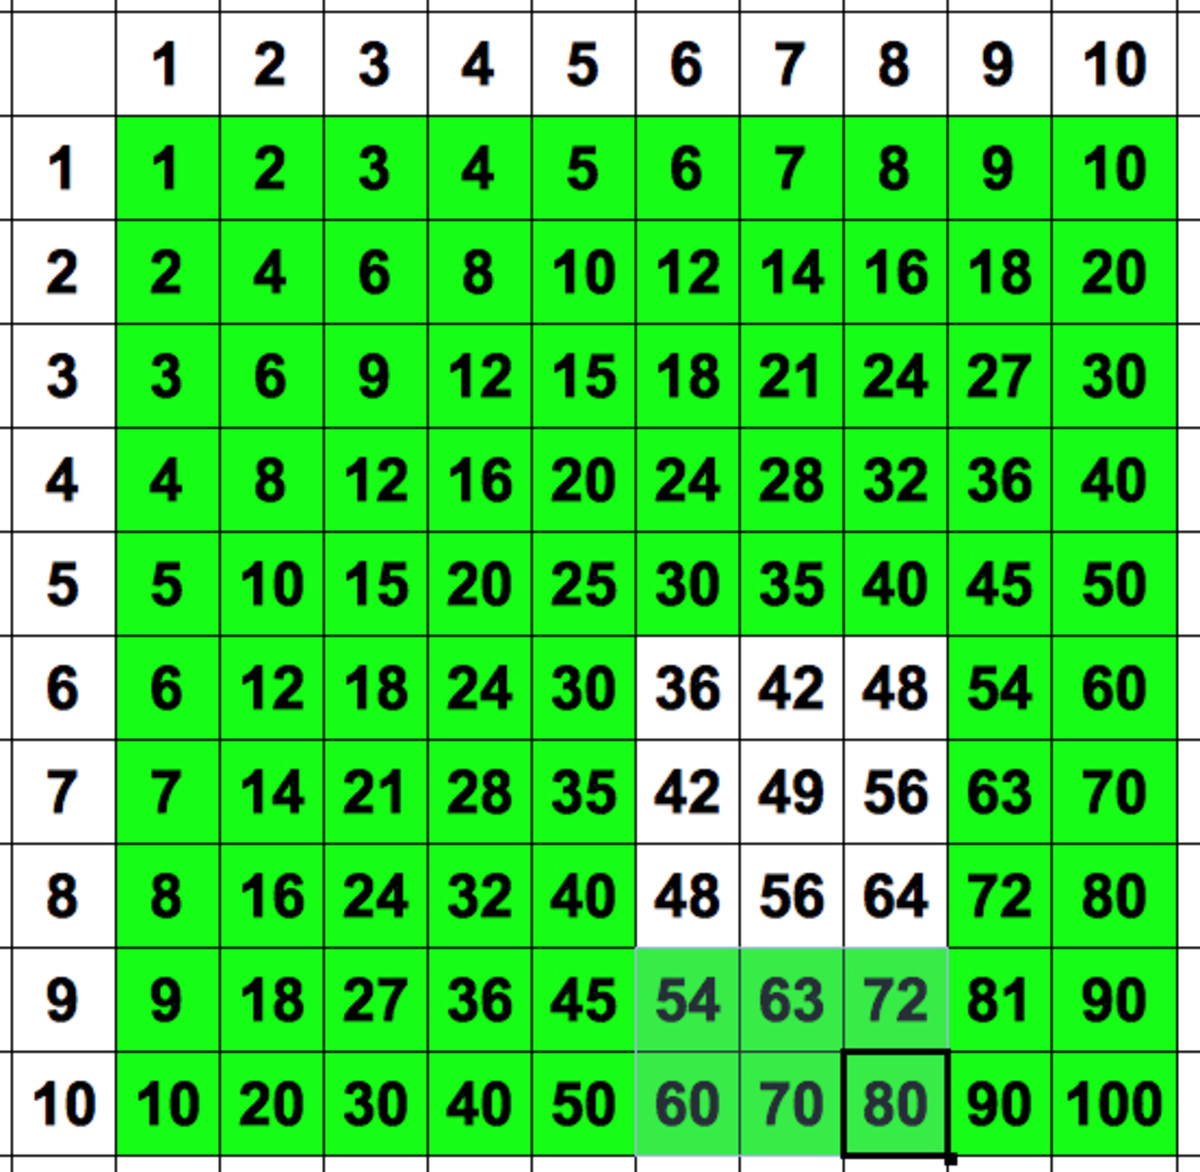 Learn a trick to conquer the nine times table